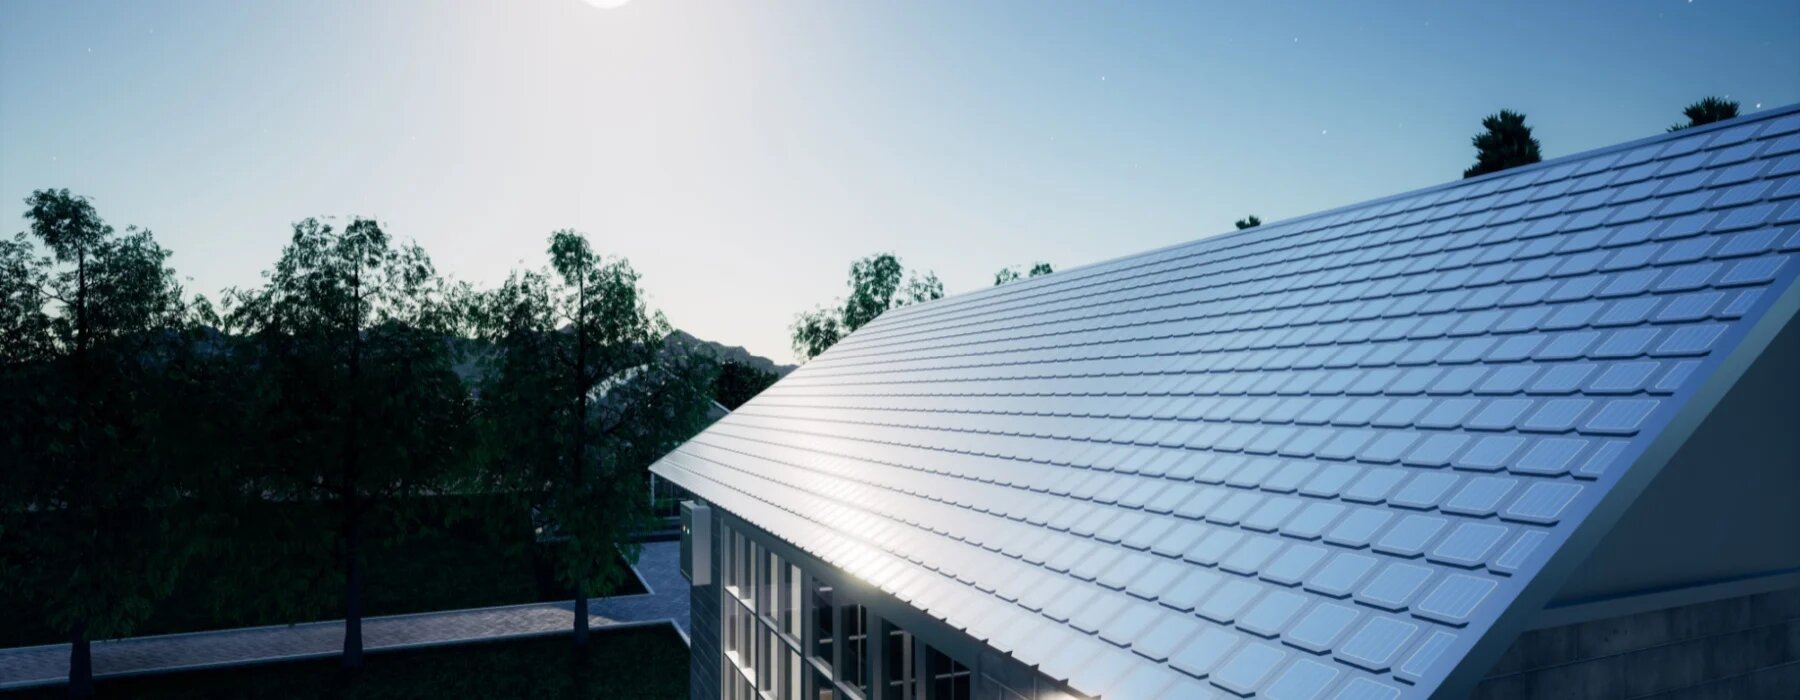 Tesla Solar Roof: How It Is Different from a Traditional Roof?